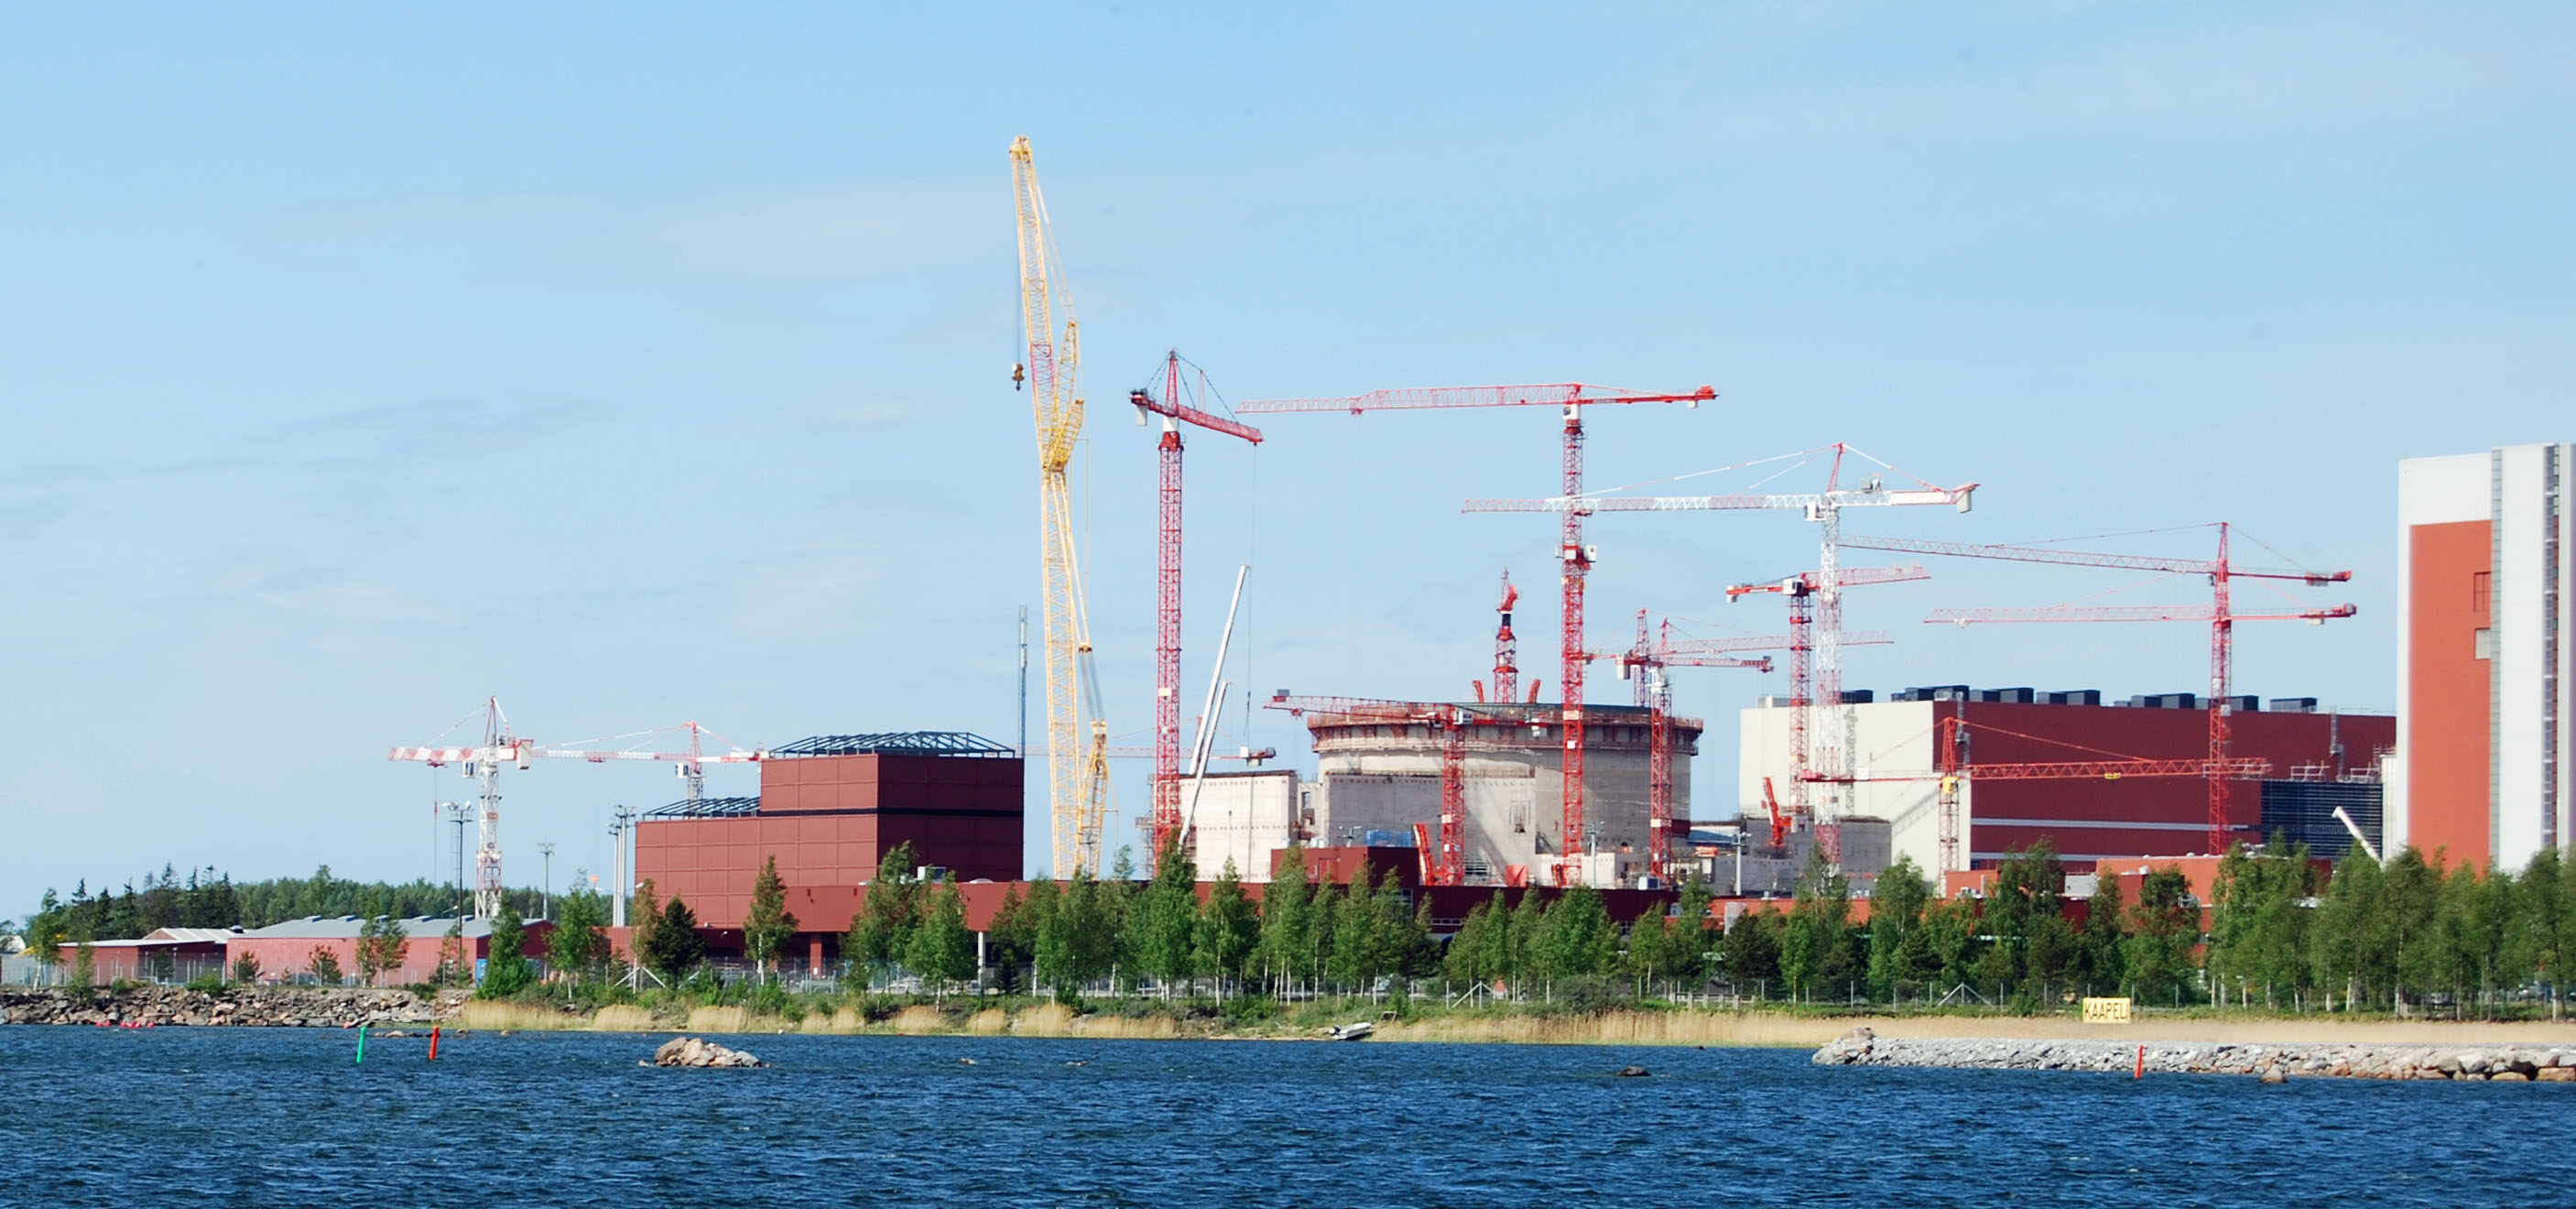 An Areva EPR reactor under construction in Finland--way over-budget and behind schedule.